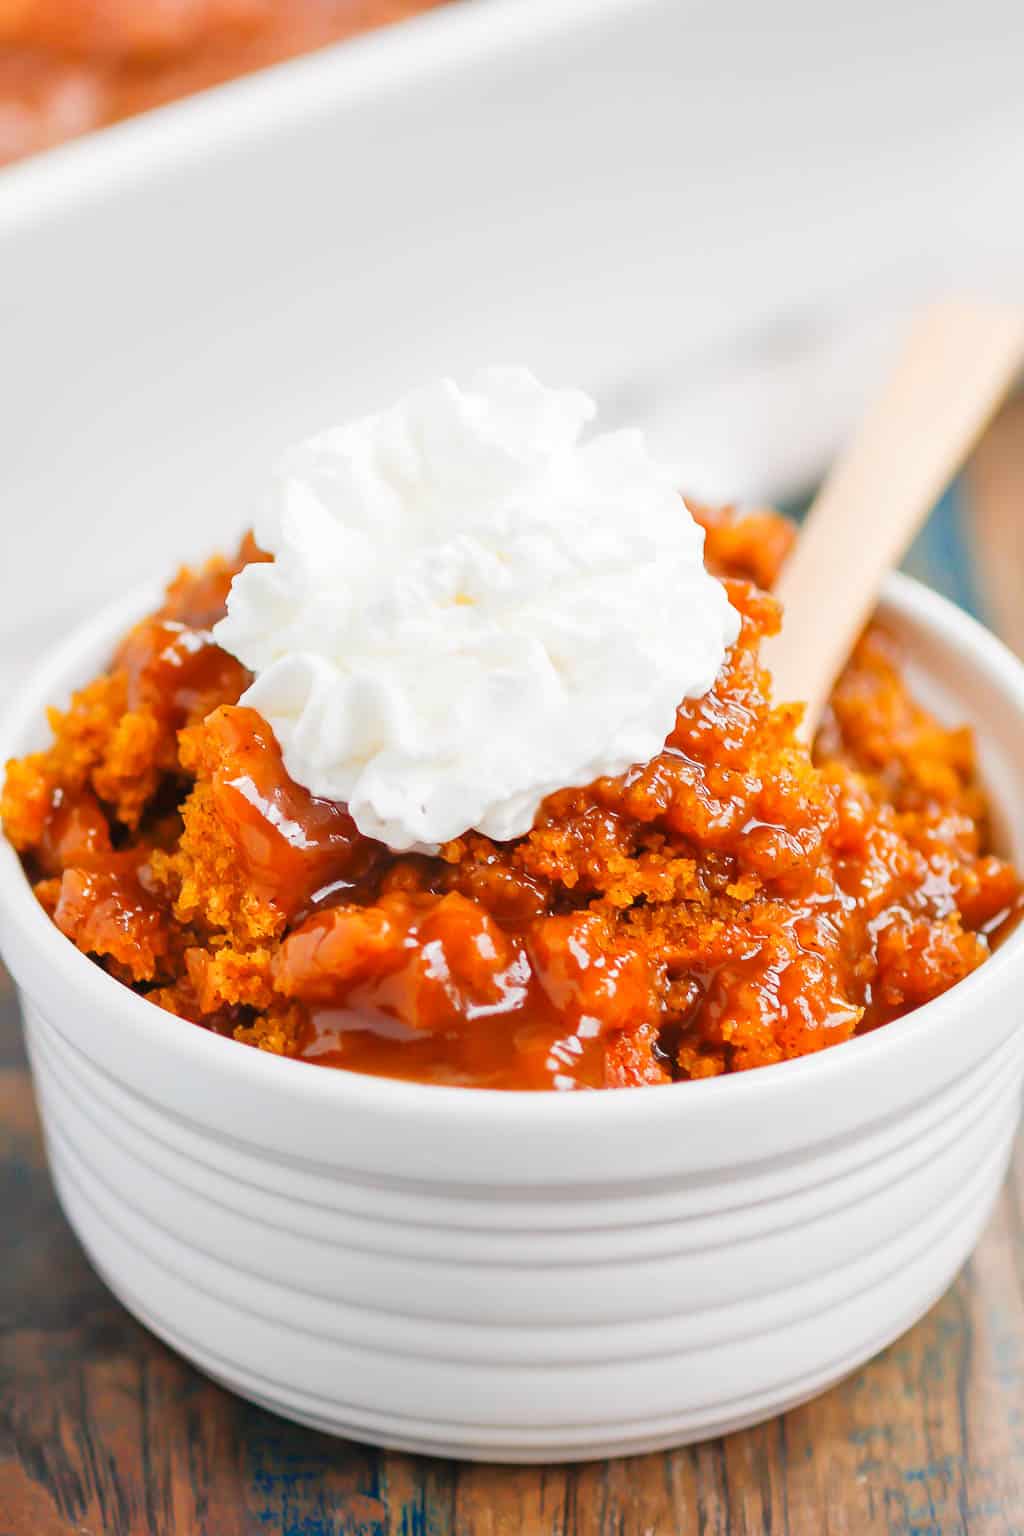 Pumpkin Cobbler is a simple dessert that's bursting with cozy flavors. With a soft, pumpkin cake on top and a decadent, caramel sauce on the bottom, this dish is perfect for fall! #cobbler #pumpkincobbler #cobblerrecipe #pumpkindessert #thanksgivingdessert #falldessert